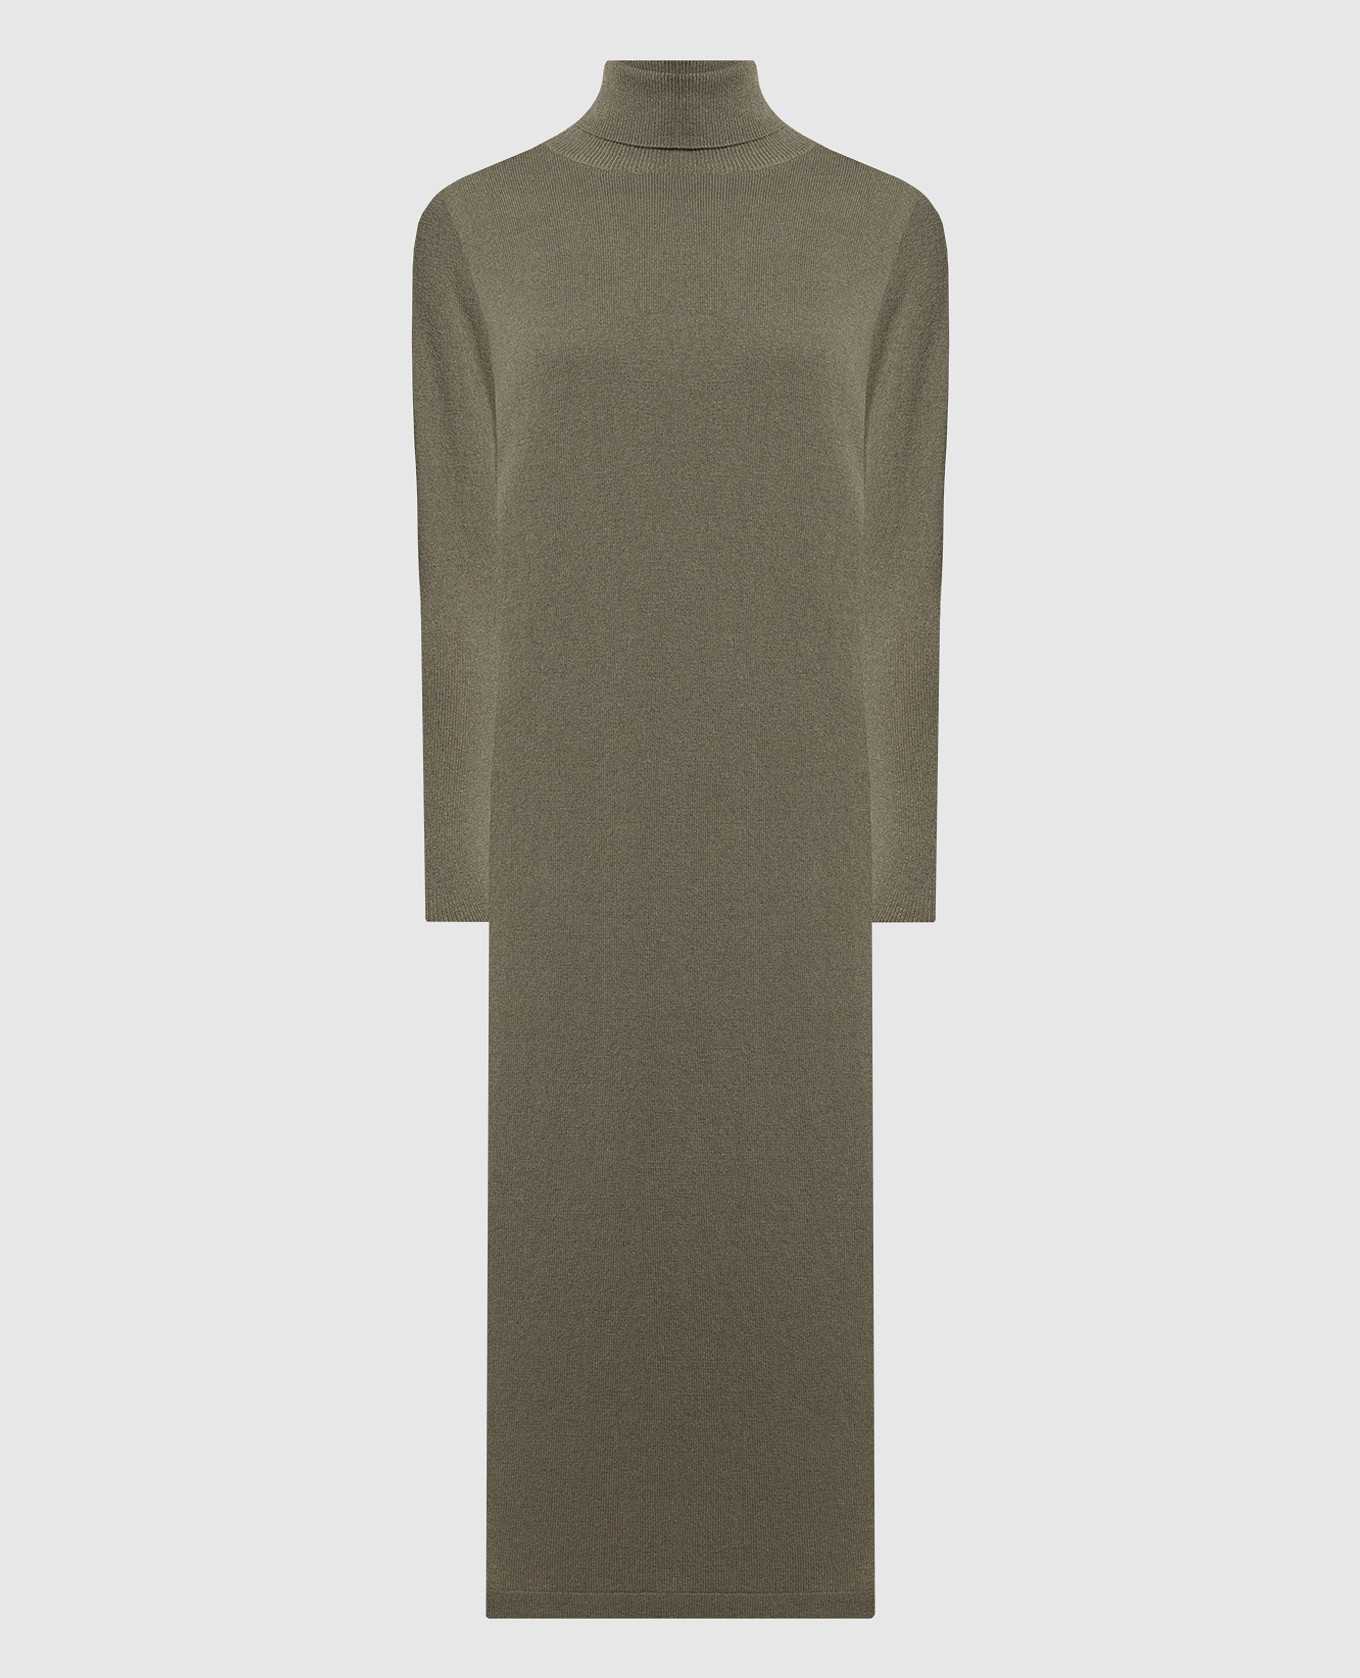 Green wool and cashmere dress